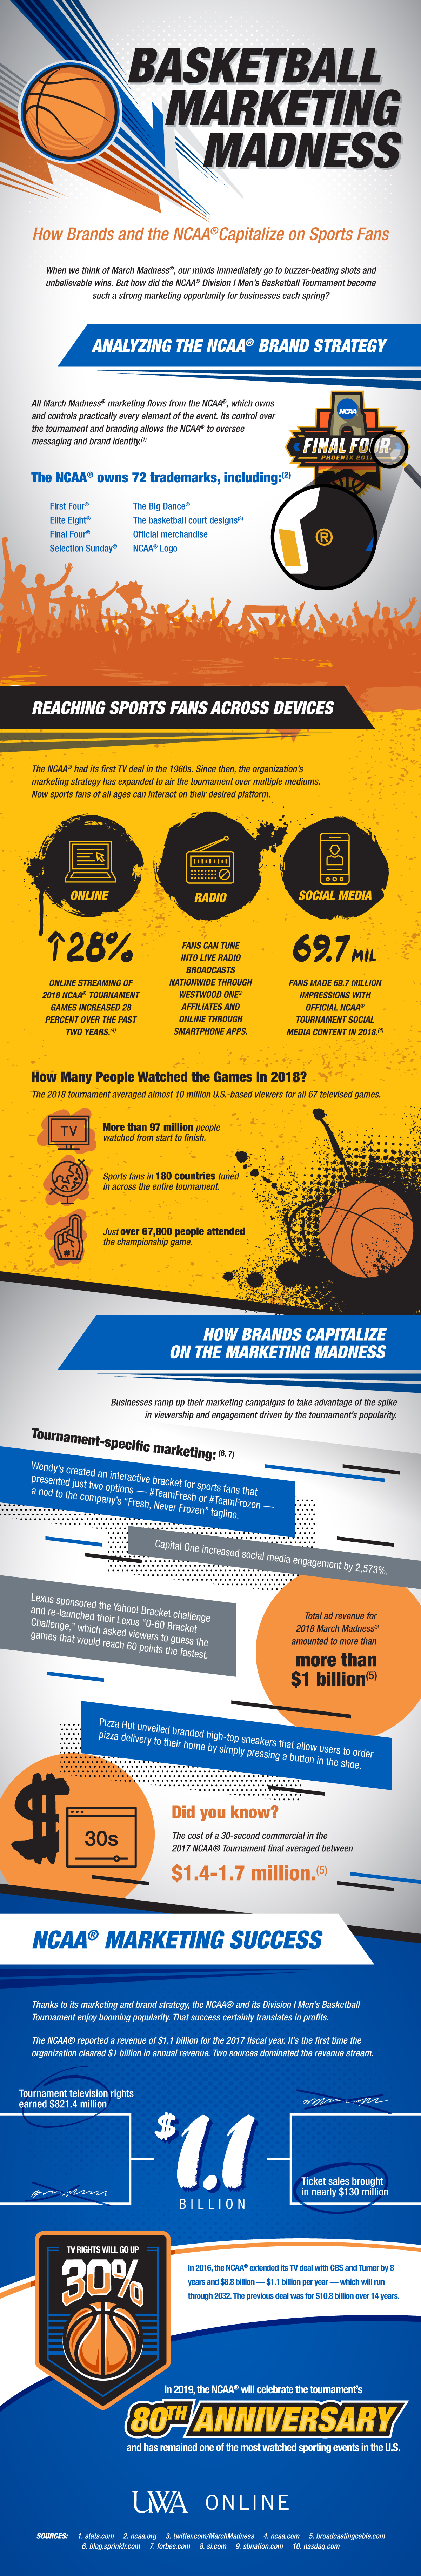 Illustrated infographic showing statistics about marketing during the March basketball tournament.